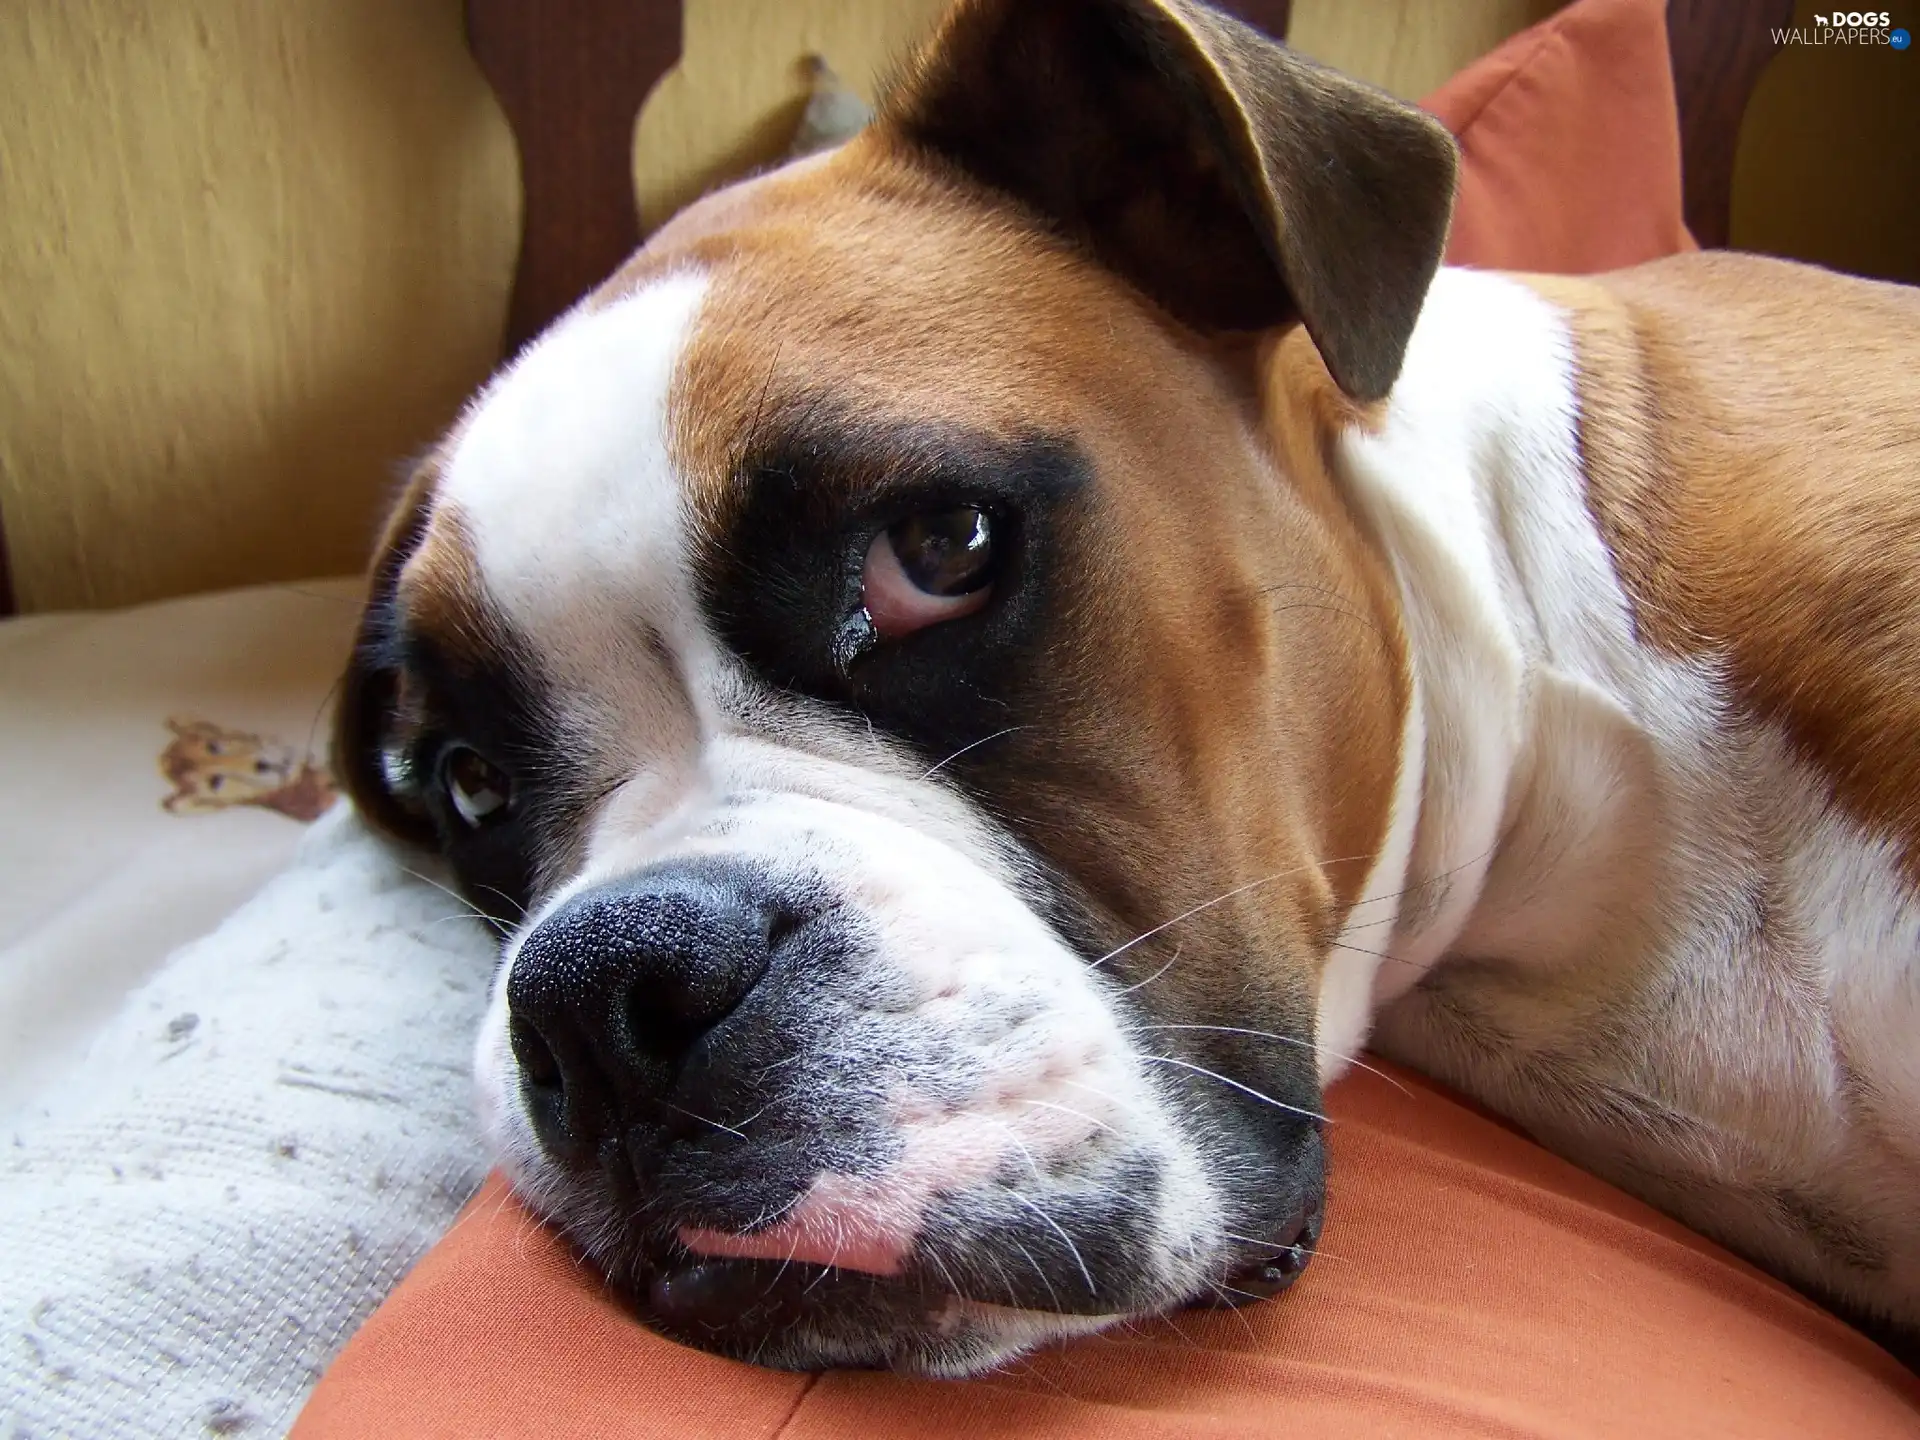 muzzle, The look, boxer